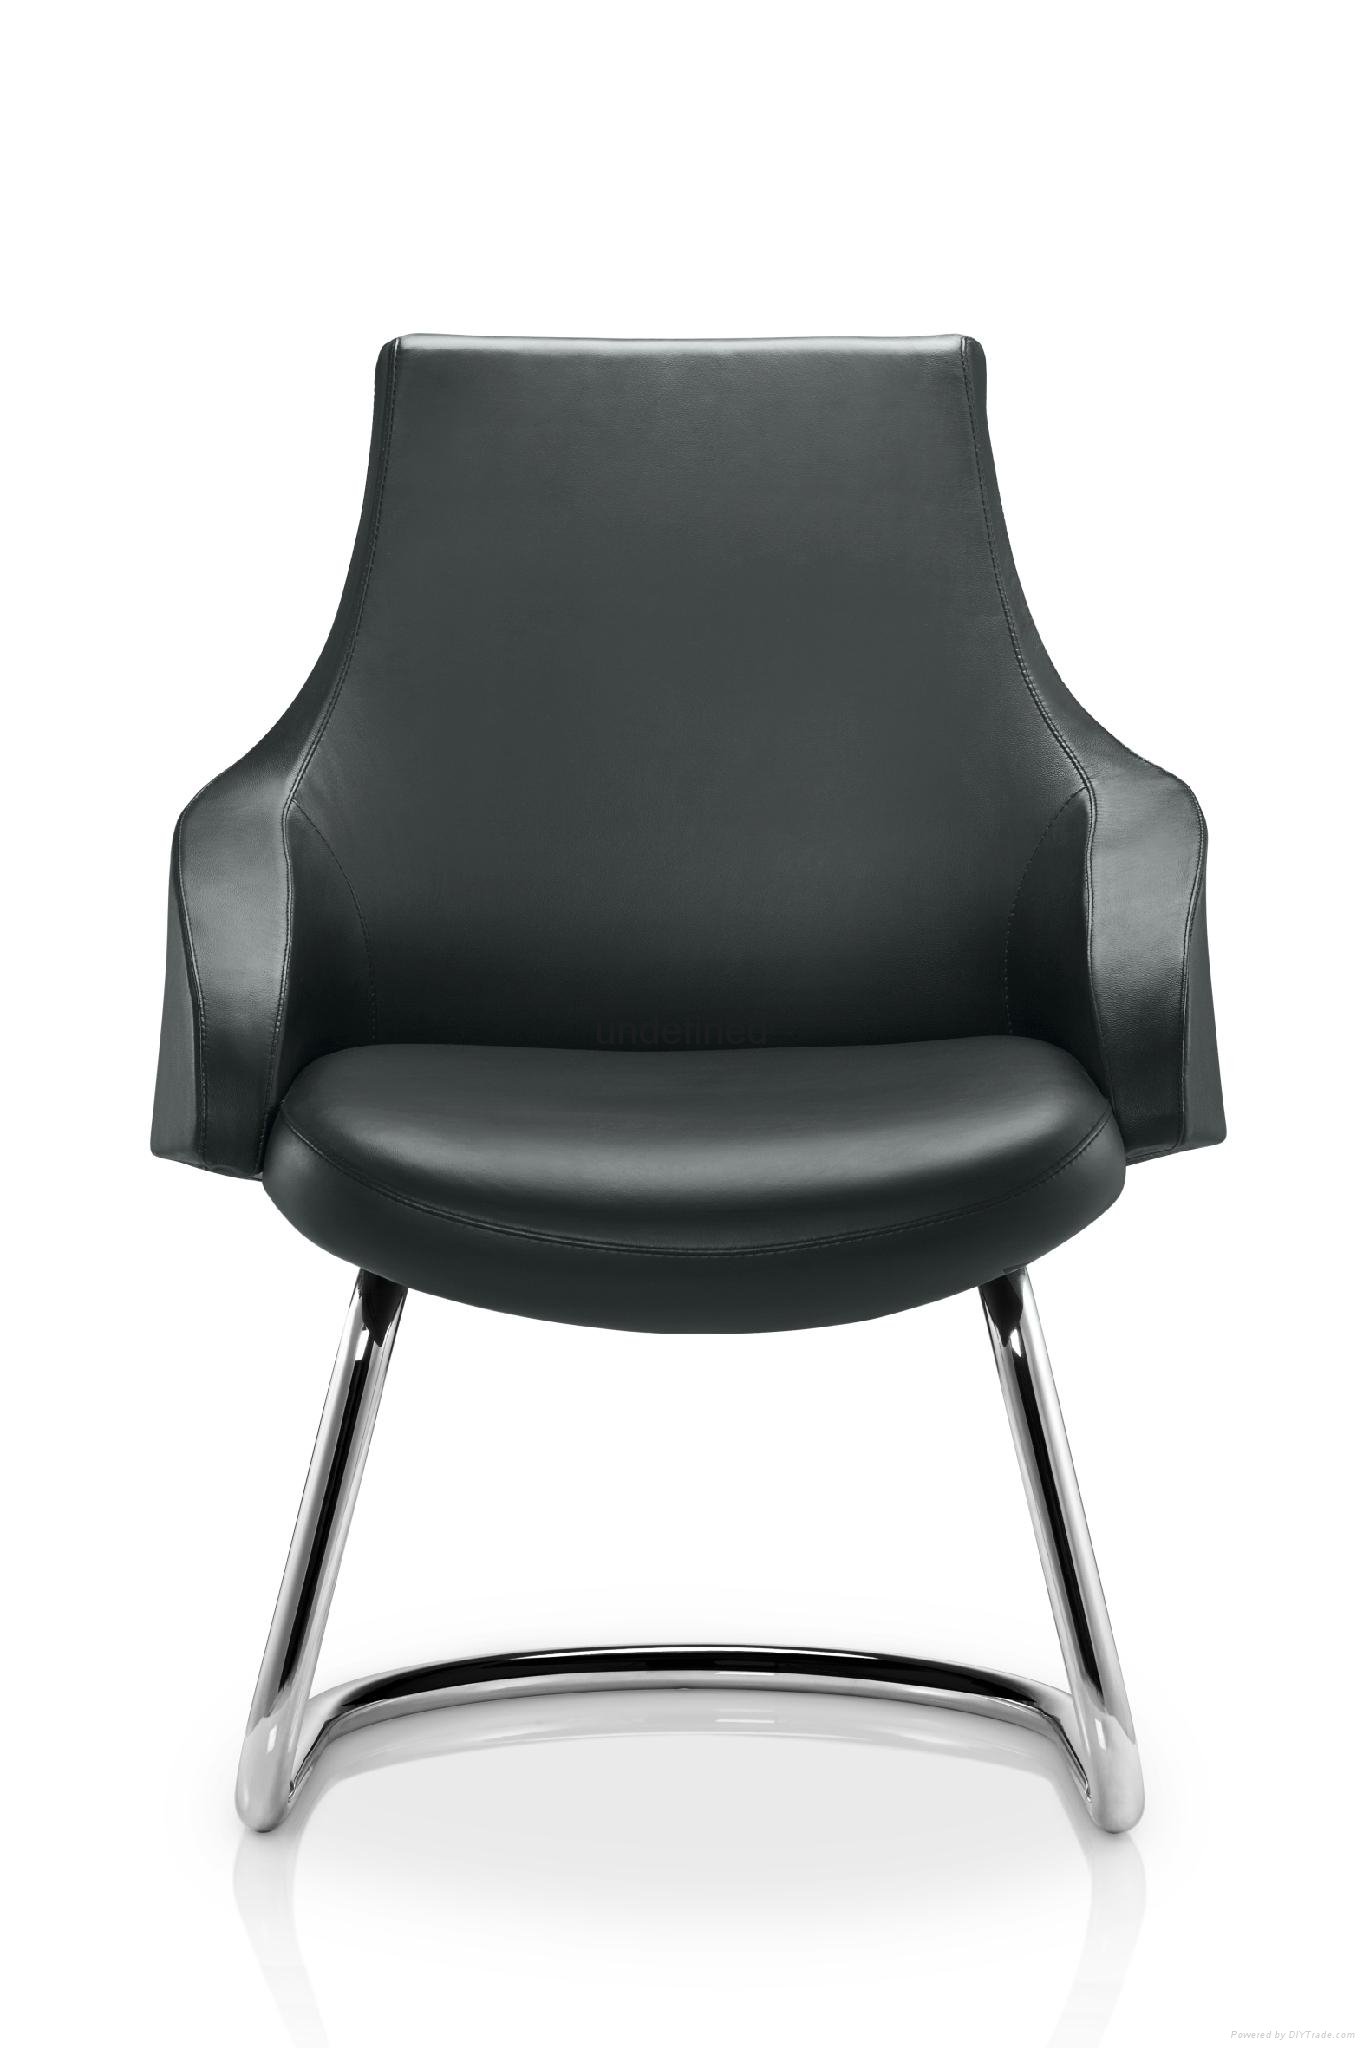 Executive chairs 5